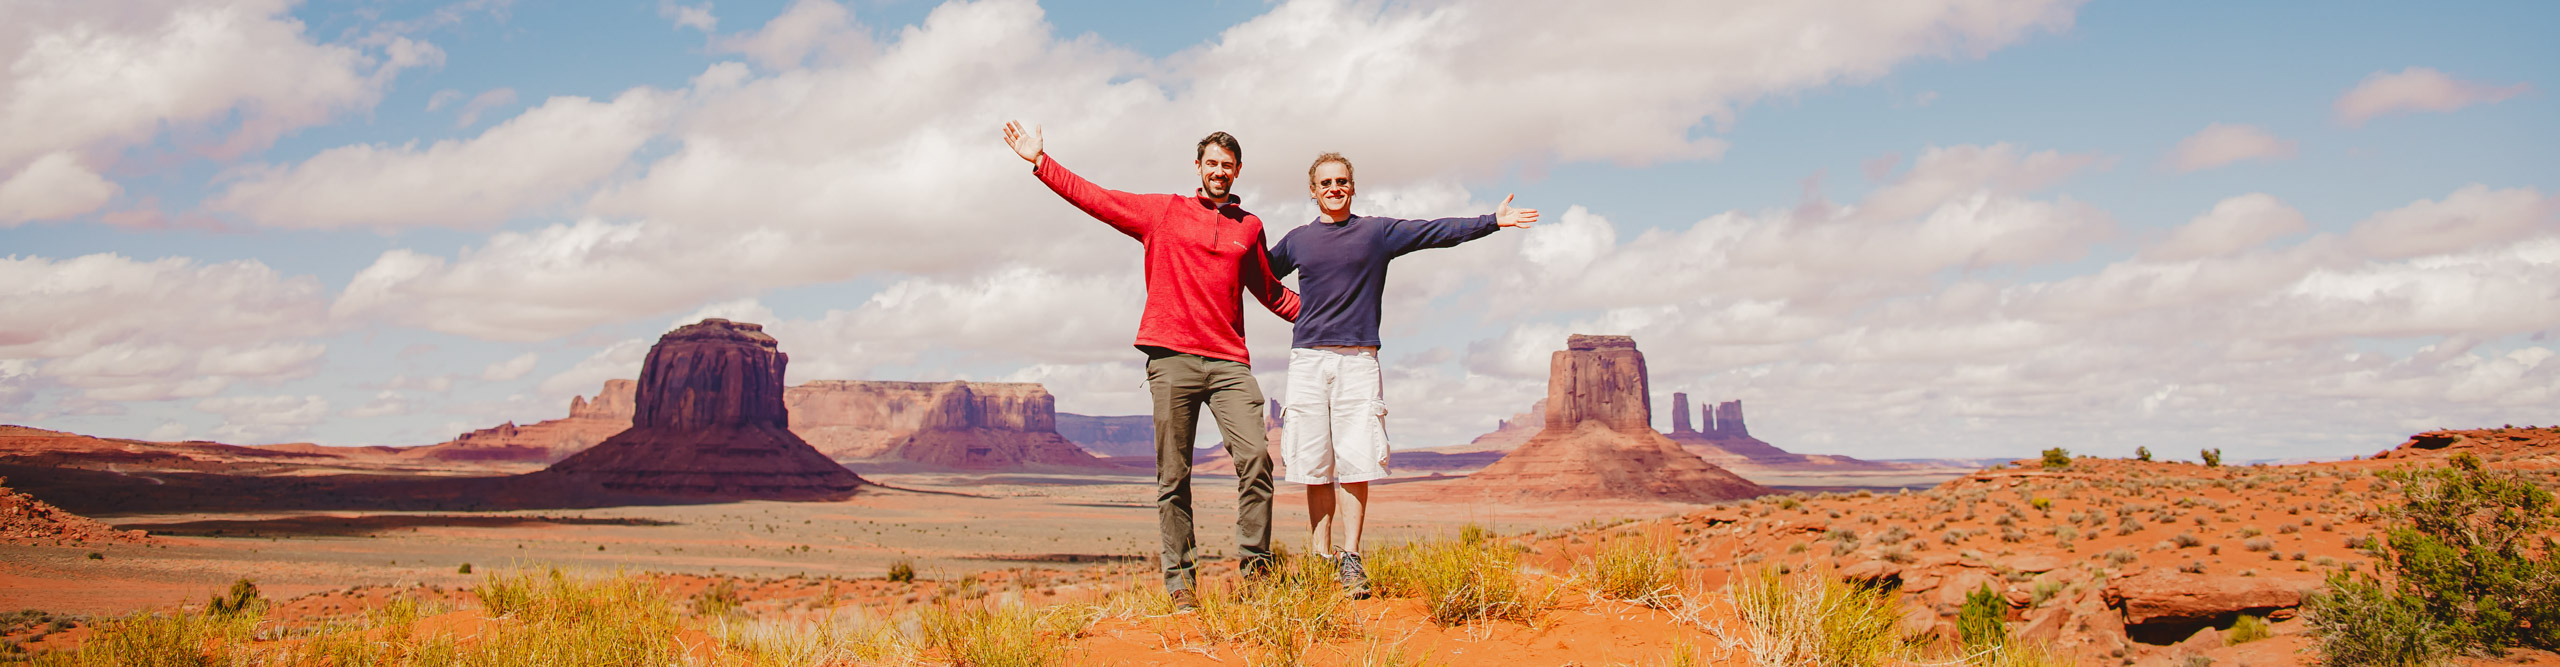 People with arms outstreched for a photo in front of Monument Valley, Arizona 